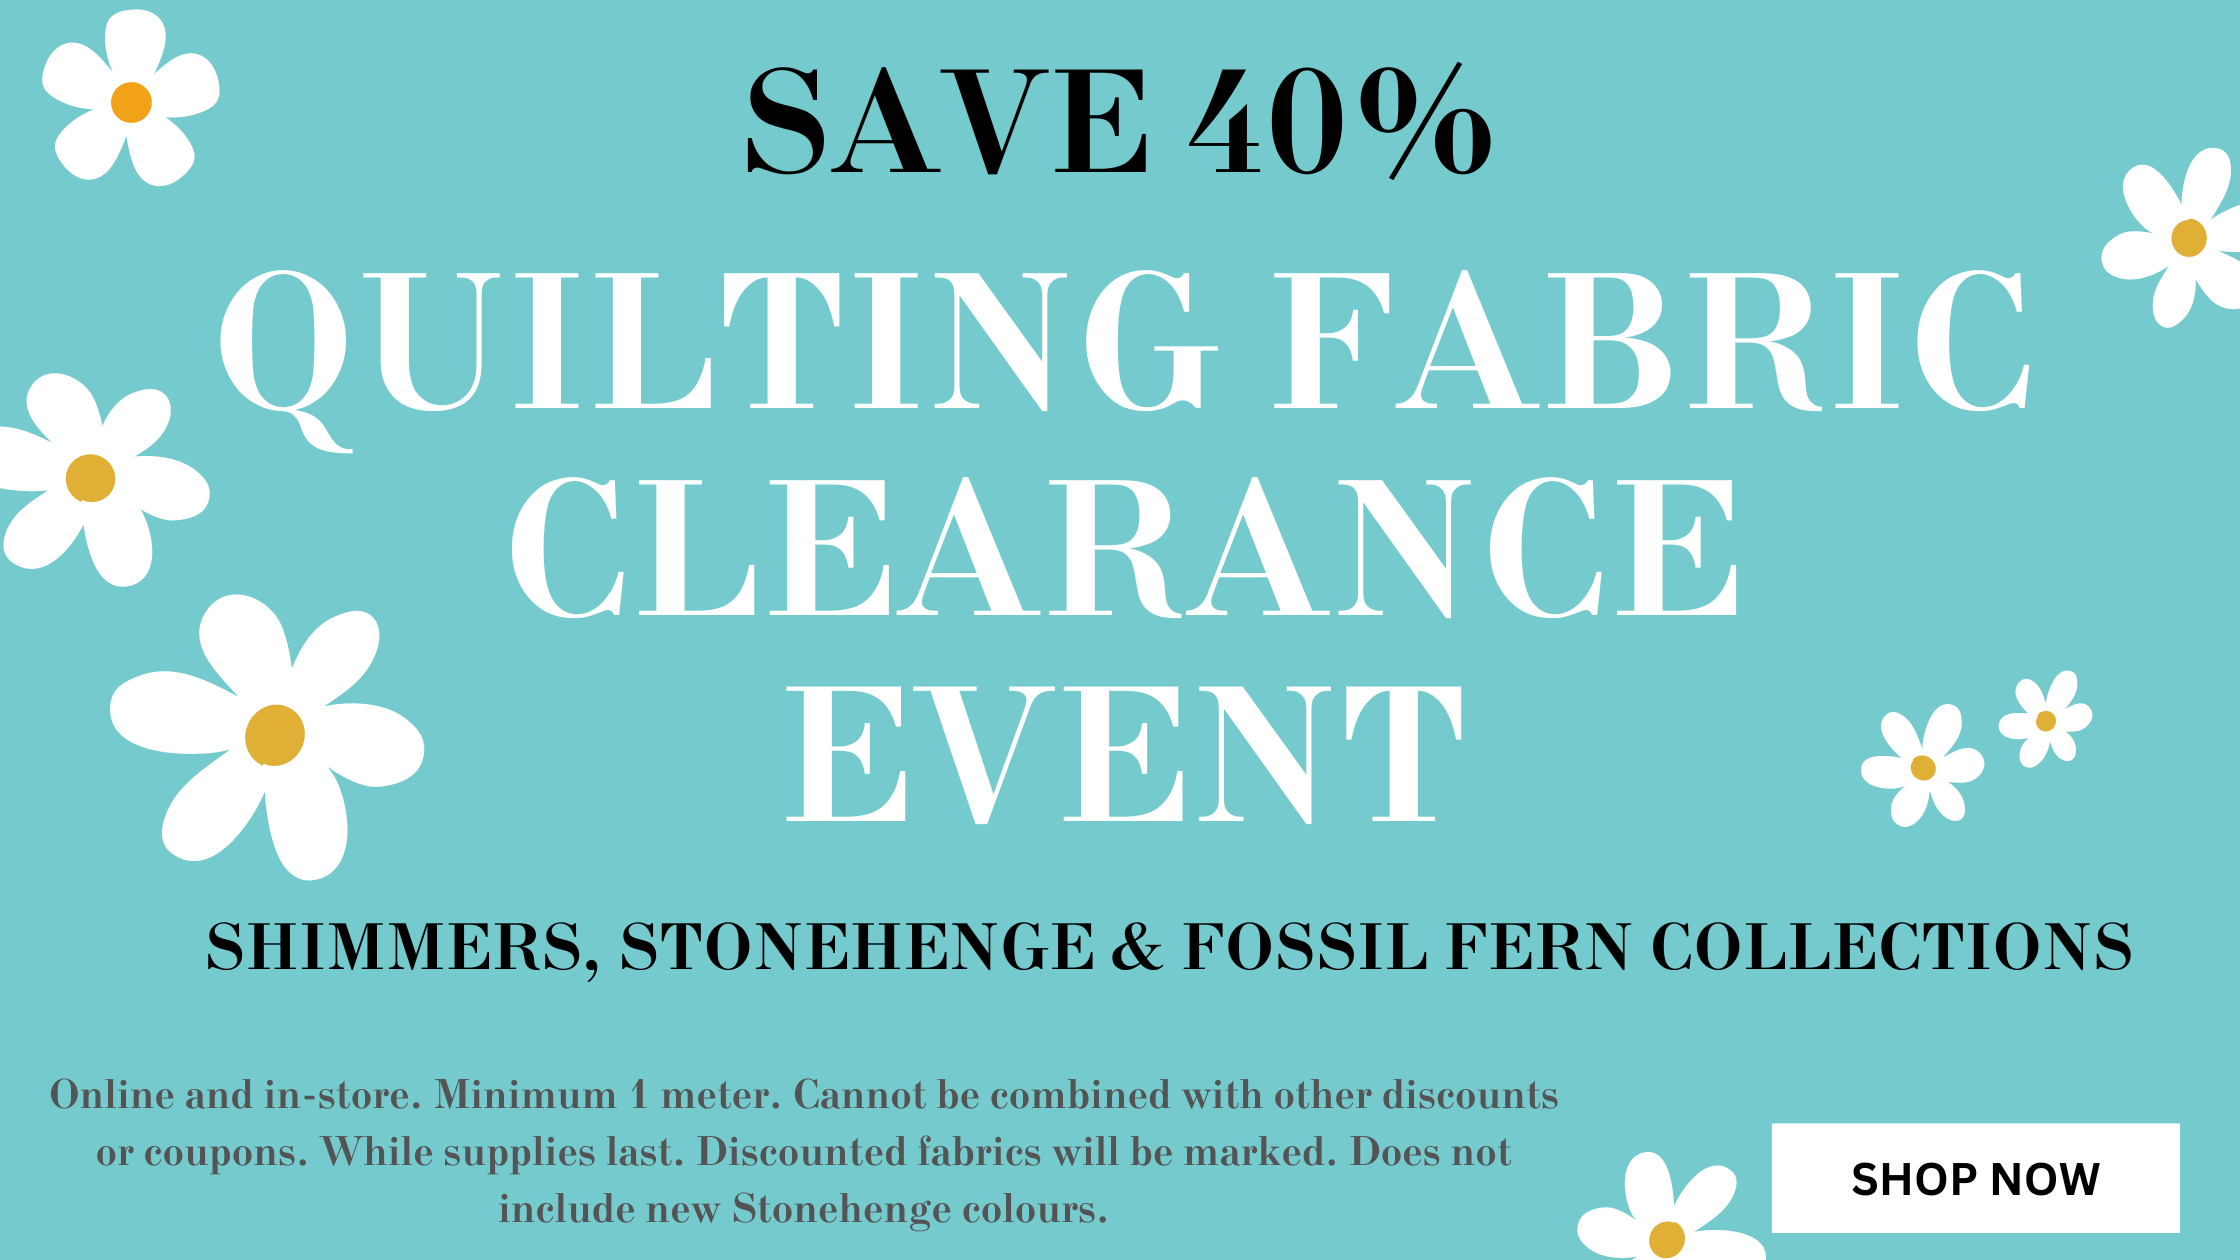 Quilting Fabric Clearance Event - Shimmer, Stonehenge & Fossil Fern Collections. Save 40%